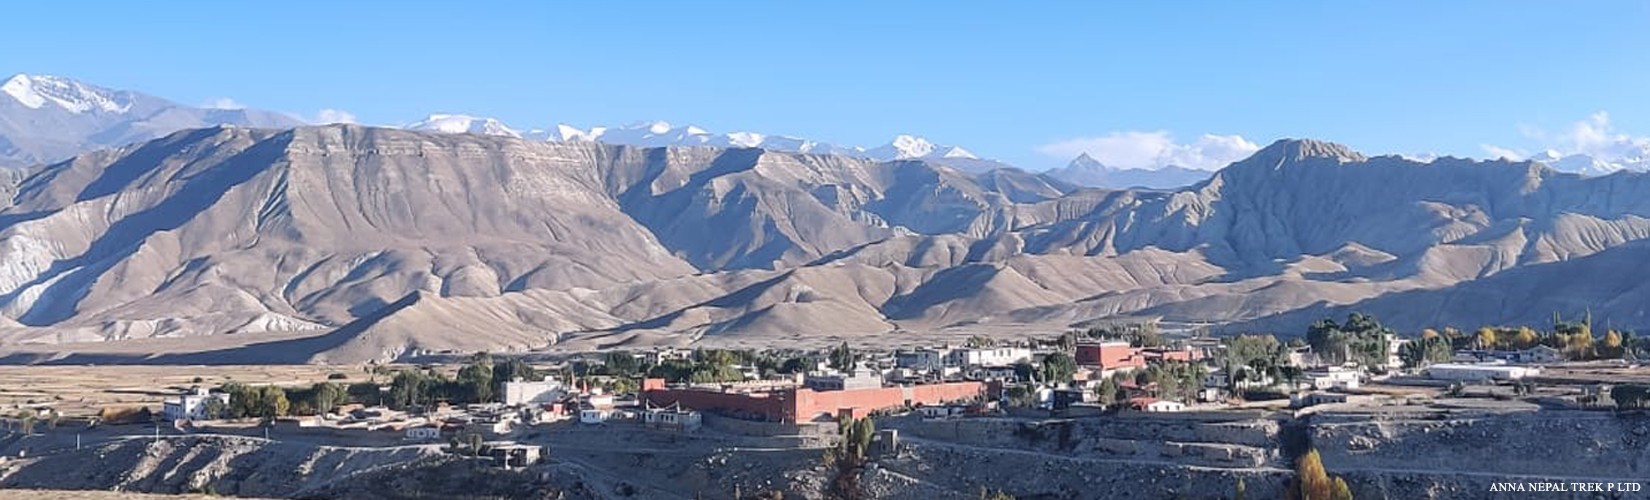 Upper Mustang - Lo Manthang valley with Himalayan background